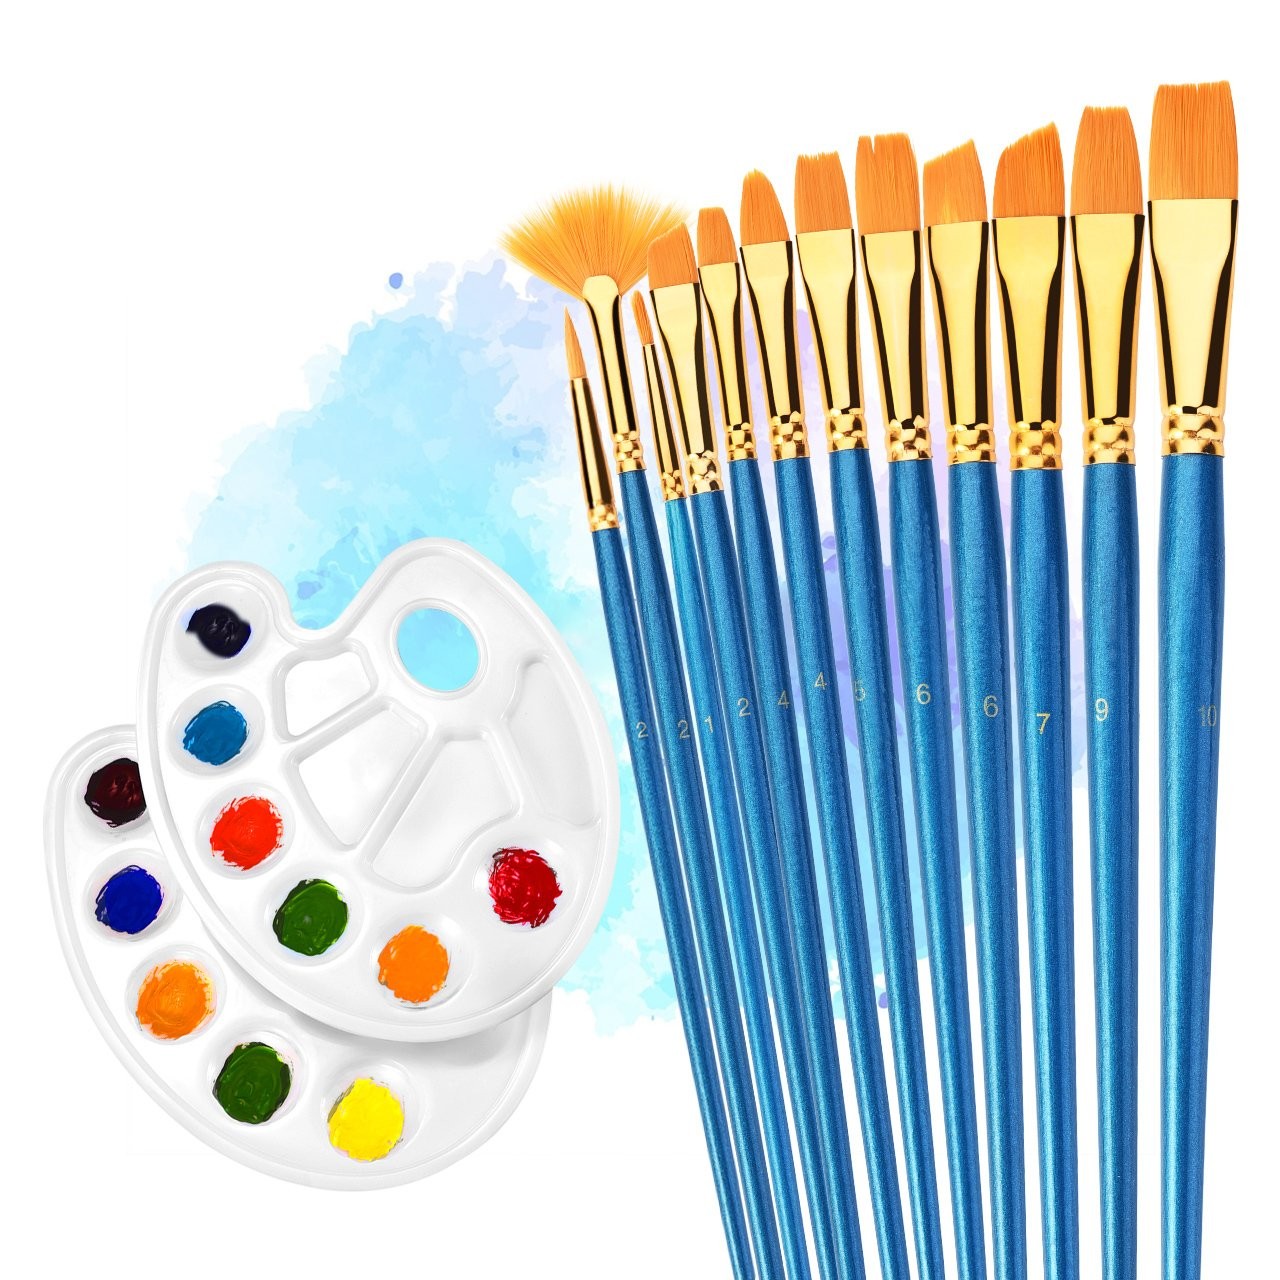 12 Pieces Paint Brushes, Painting Brush Set with 2 Palettes for Watercolor, Acrylic & Oil Pai